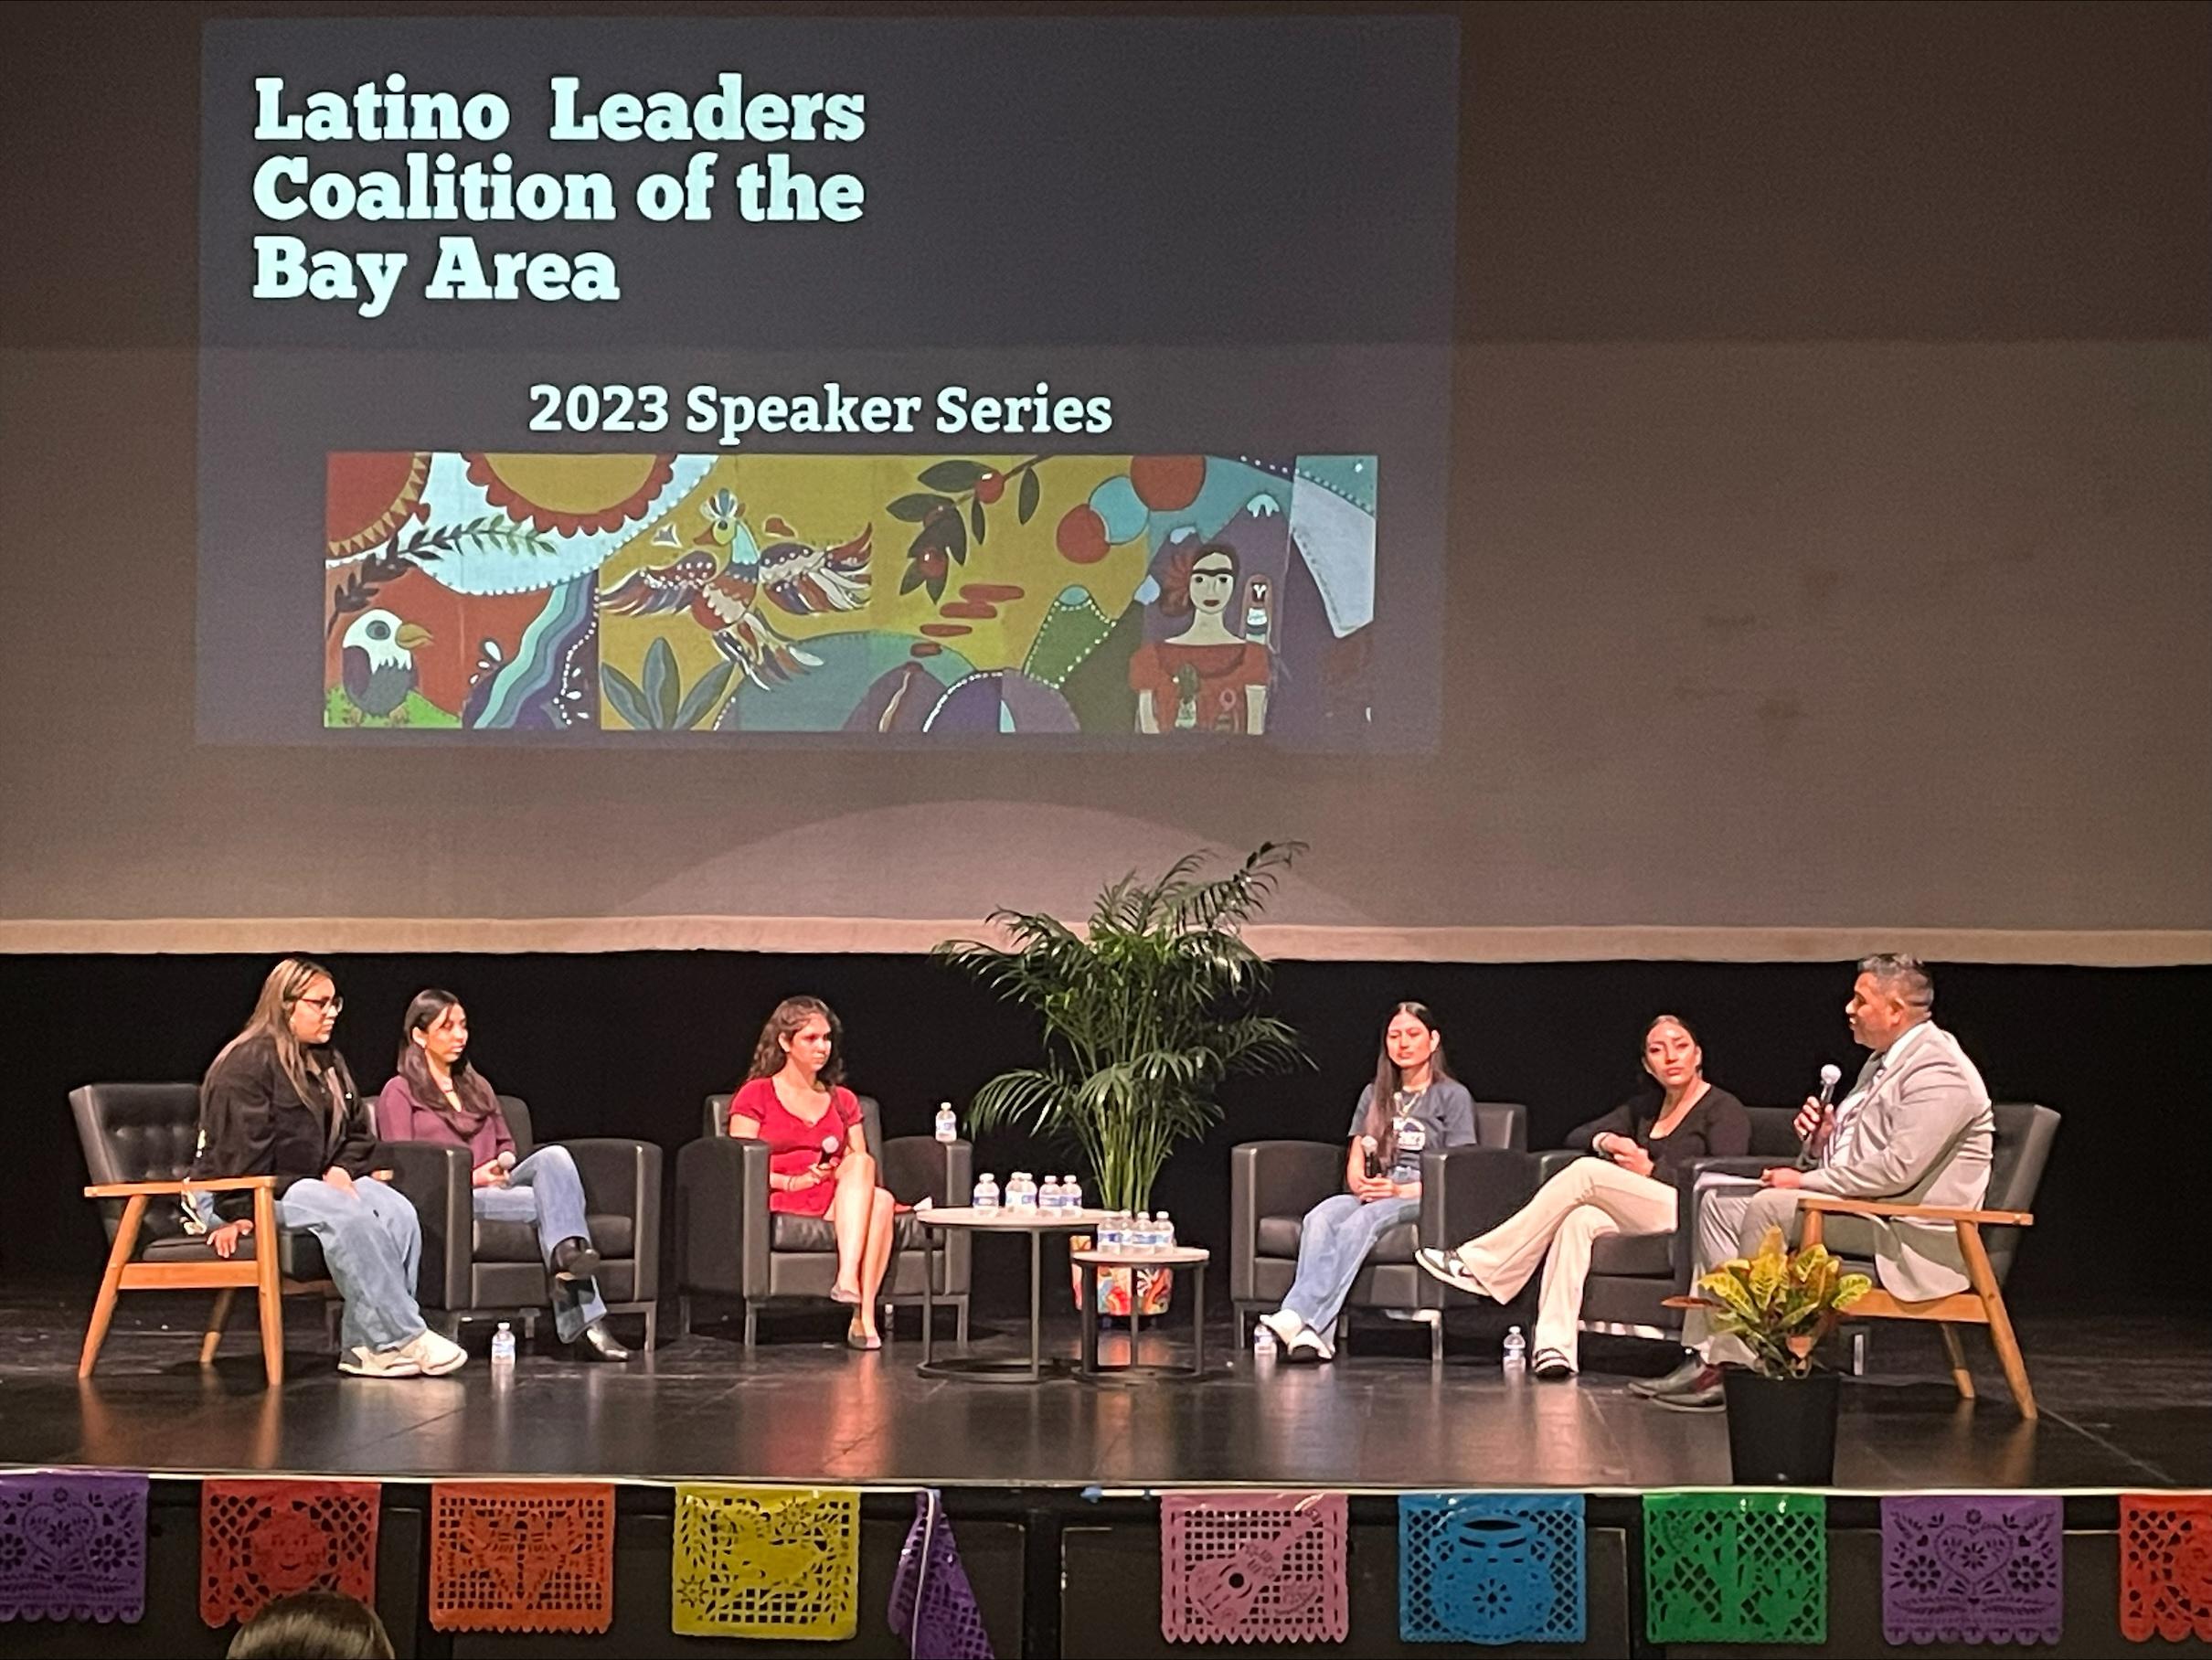 El Camino High senior Kayla Rodriguez (second from left) participate in an October 6 student panel organized by the Latino Leaders Coalition of the Bay Area in recognition of Hispanic Heritage Month.